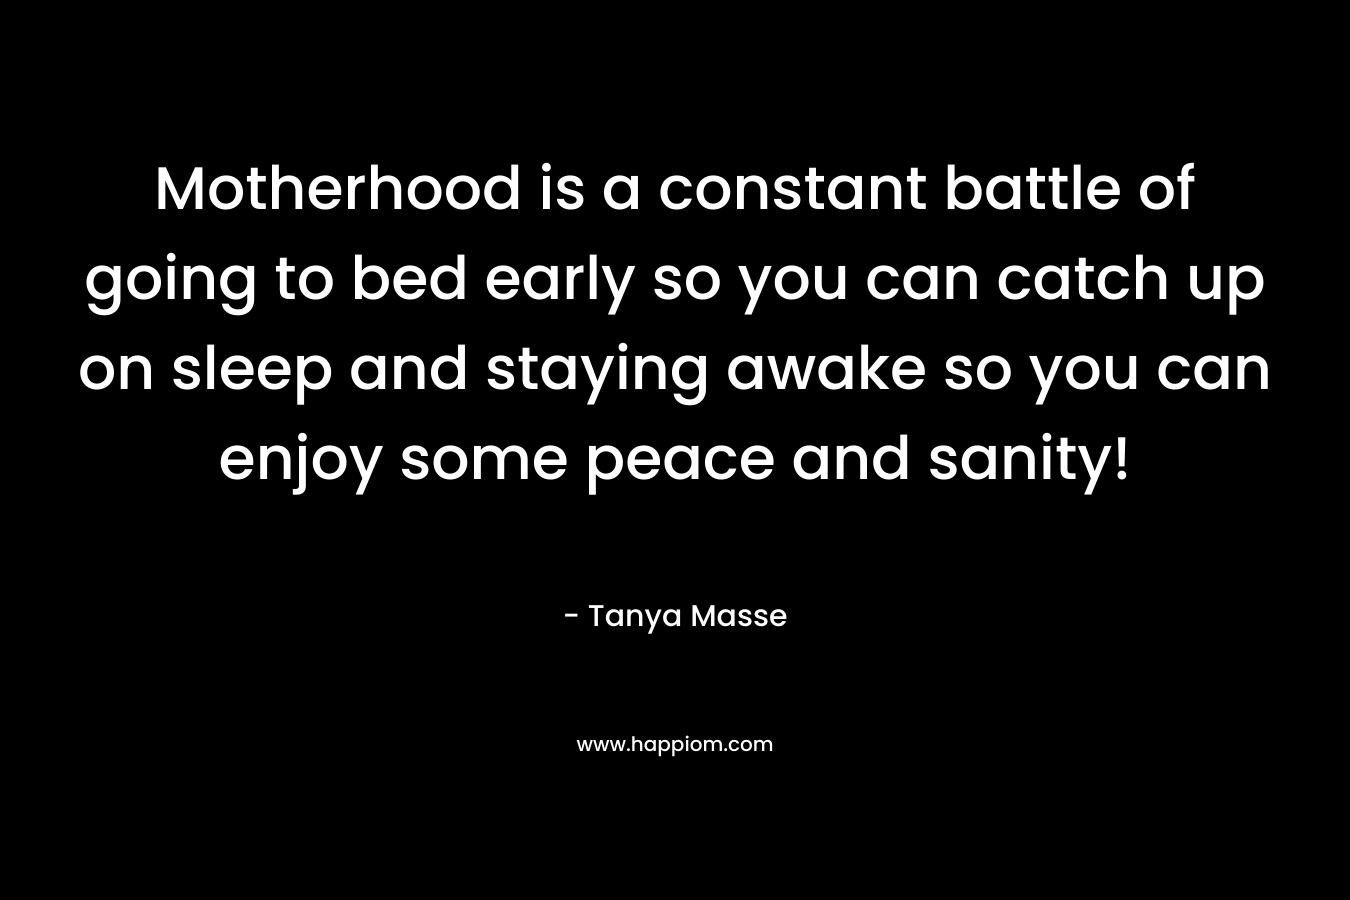 Motherhood is a constant battle of going to bed early so you can catch up on sleep and staying awake so you can enjoy some peace and sanity!